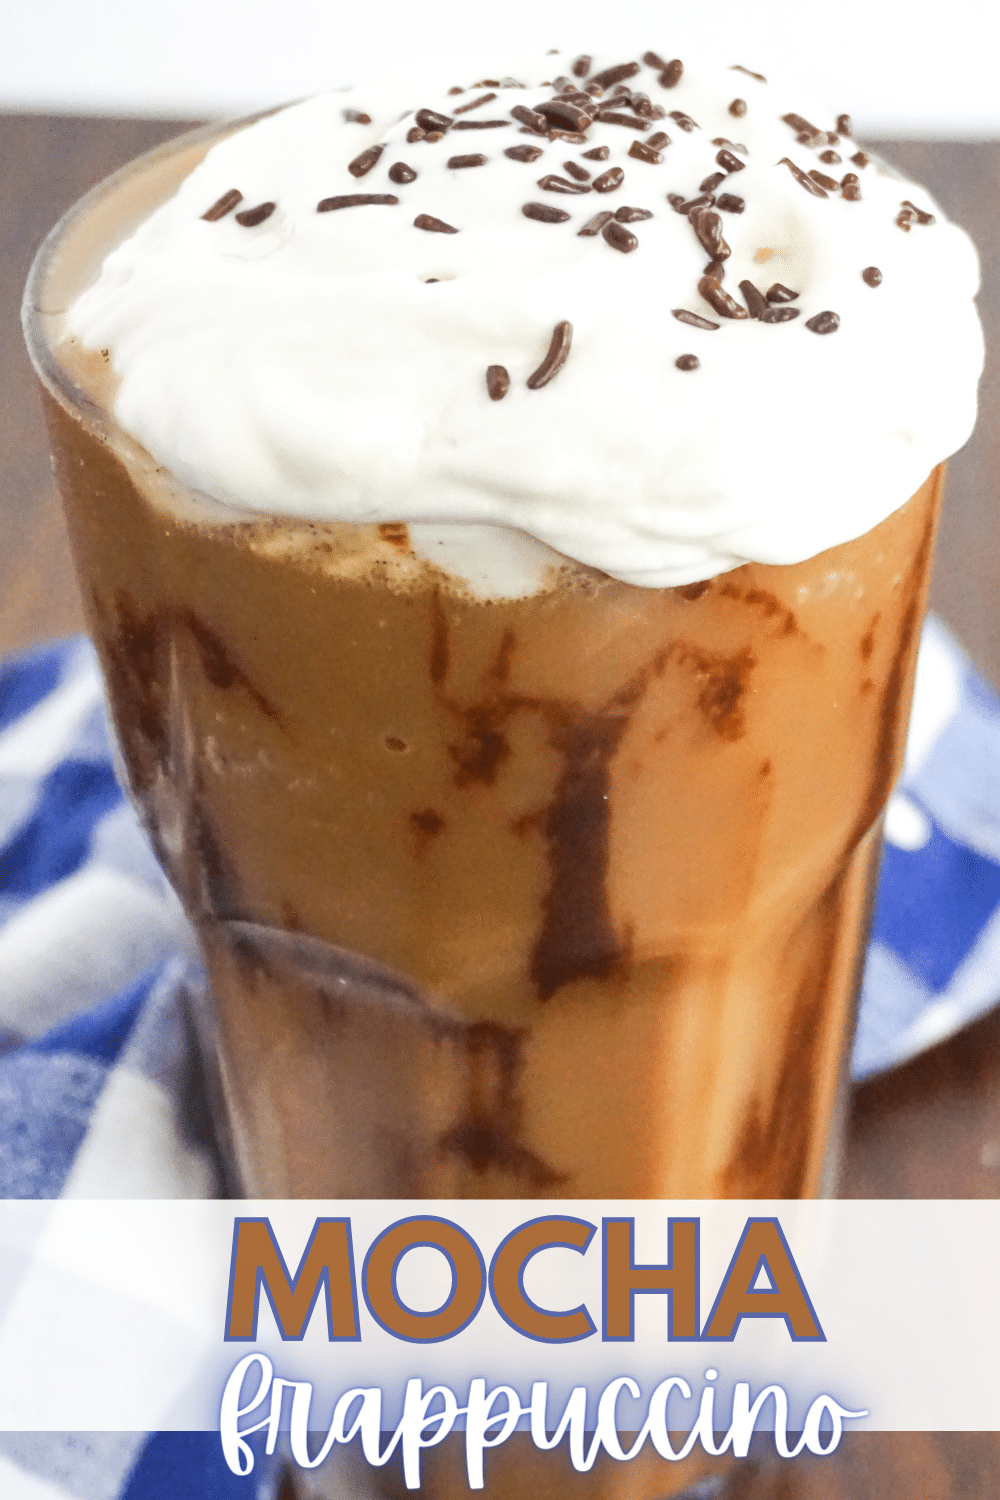 Love the taste and flavor of a mocha Frappuccino? It's time to take charge and make this homemade mocha frappuccino recipe yourself! #mochafrappuccino #mocha #frappuccino #homemadefrappuccino via @wondermomwannab